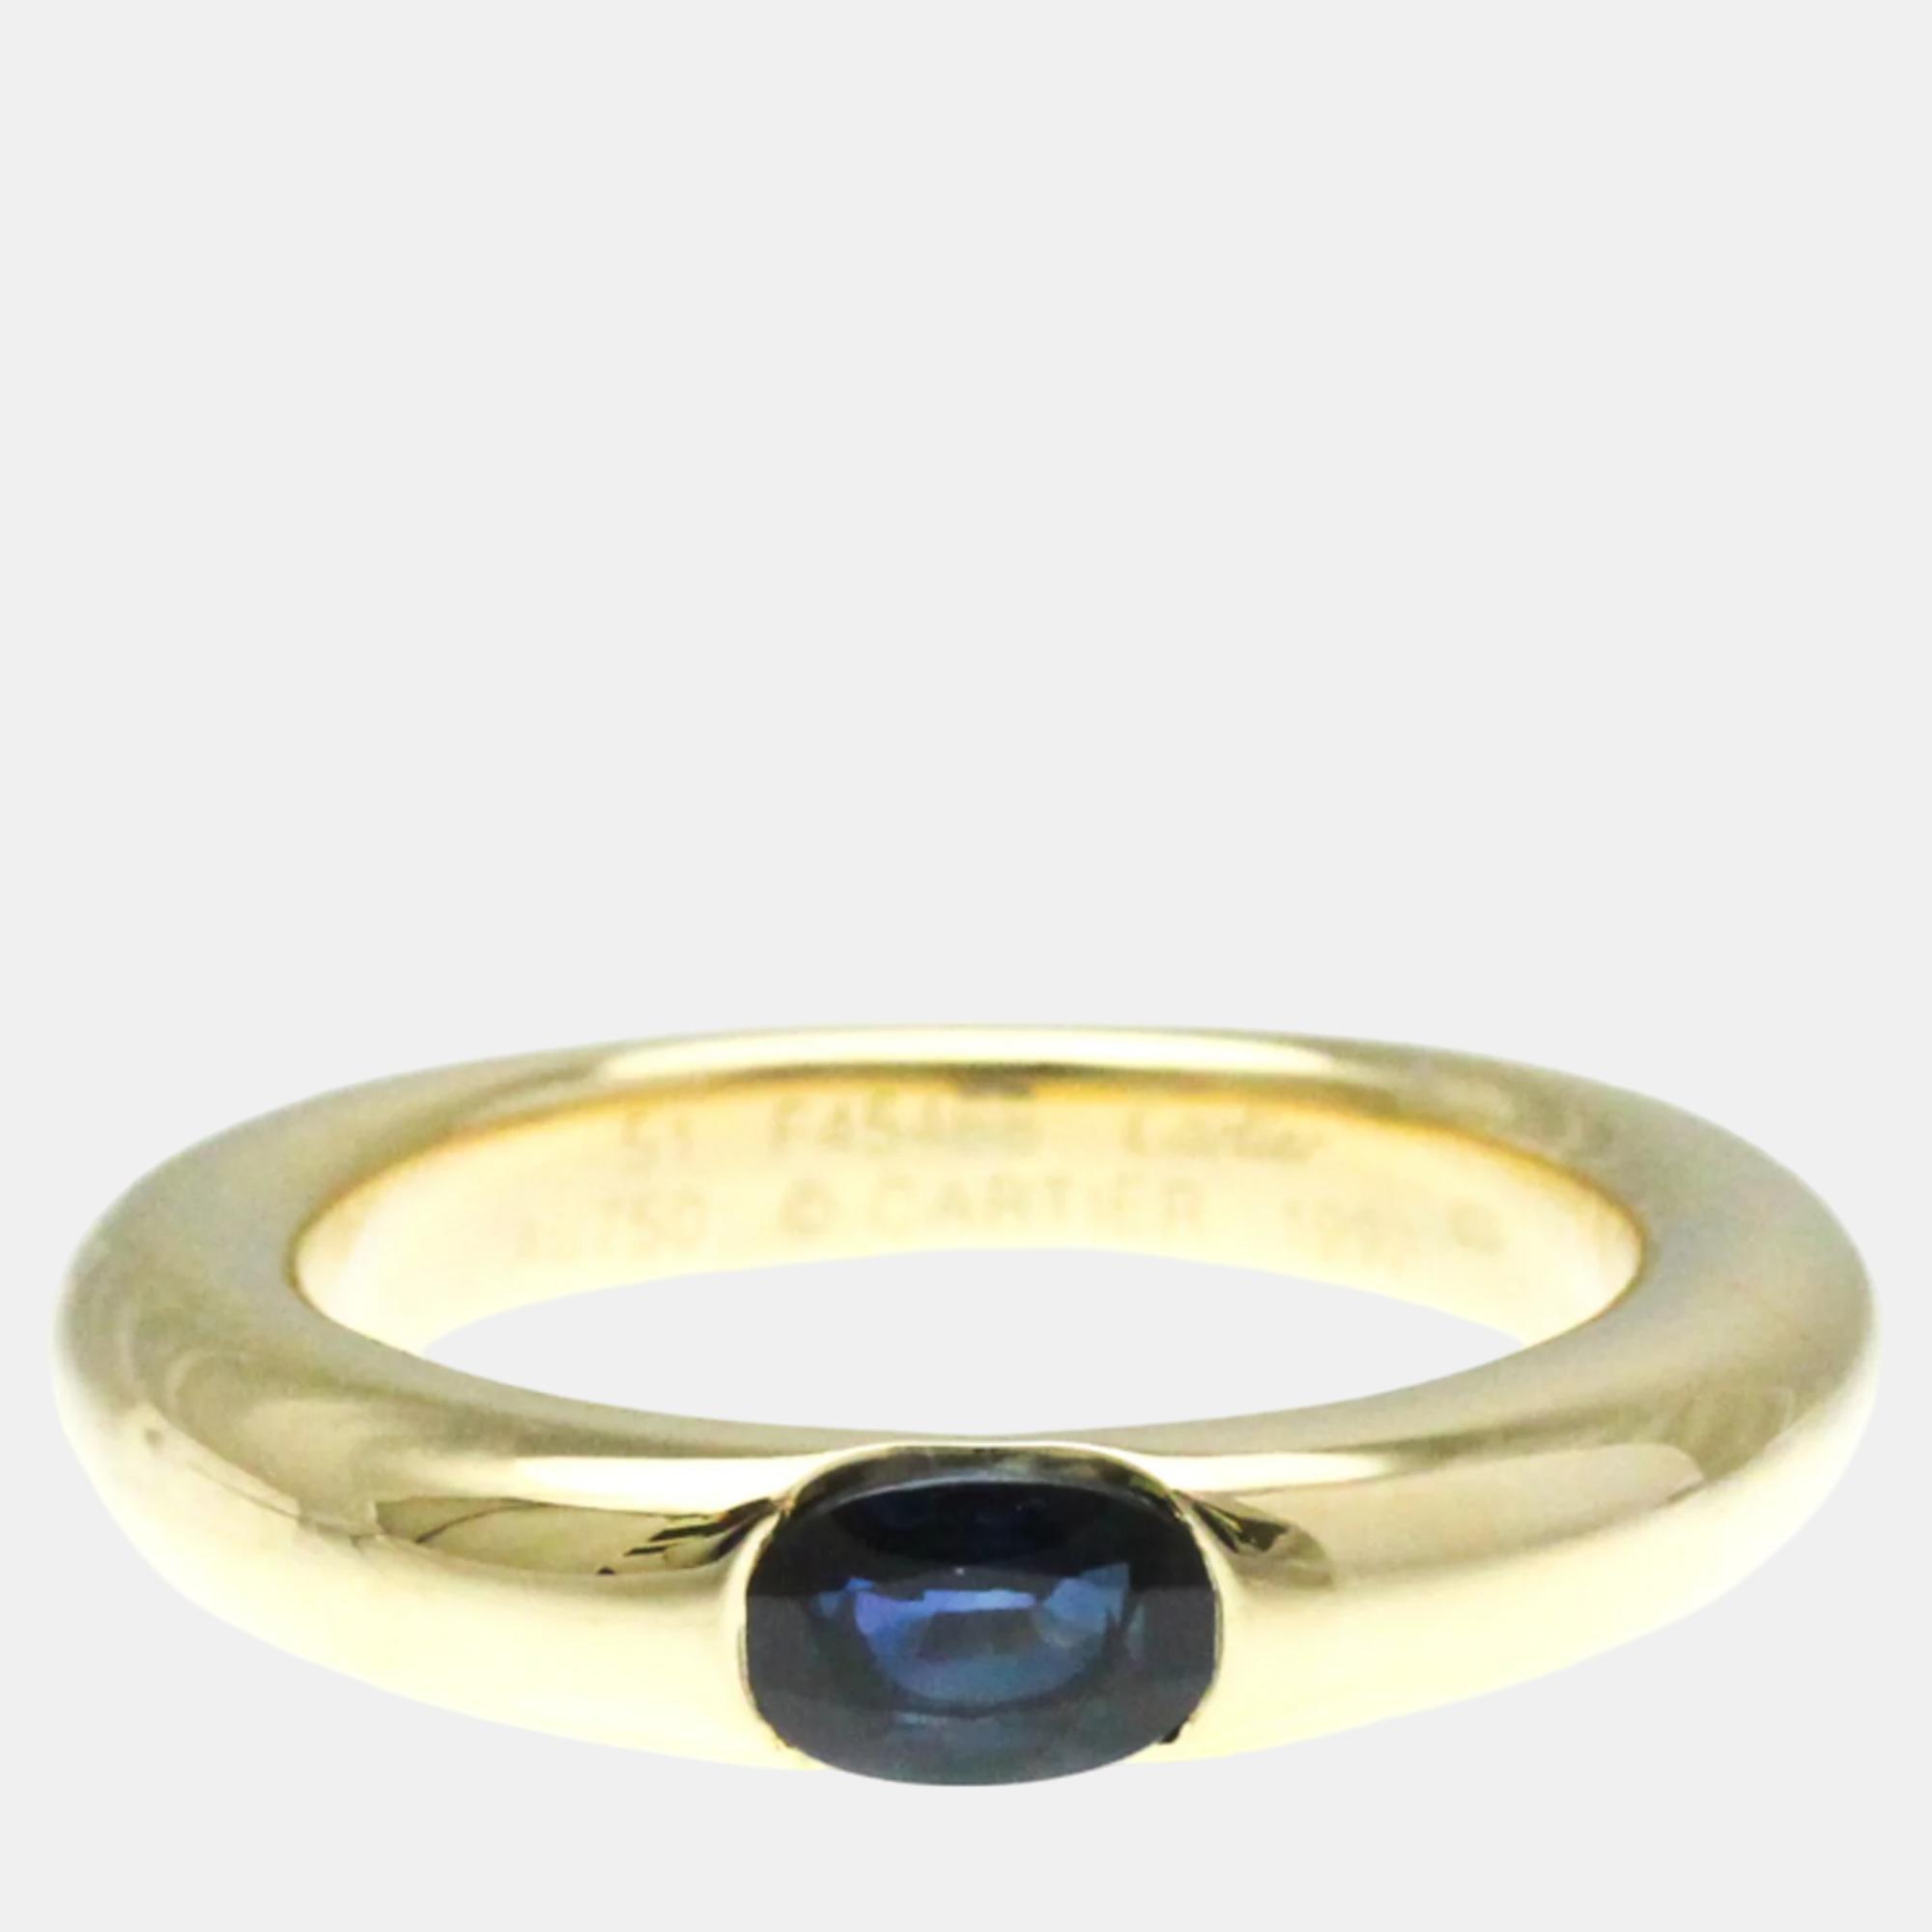 Cartier 18k yellow gold and sapphire ellipse band ring eu 51